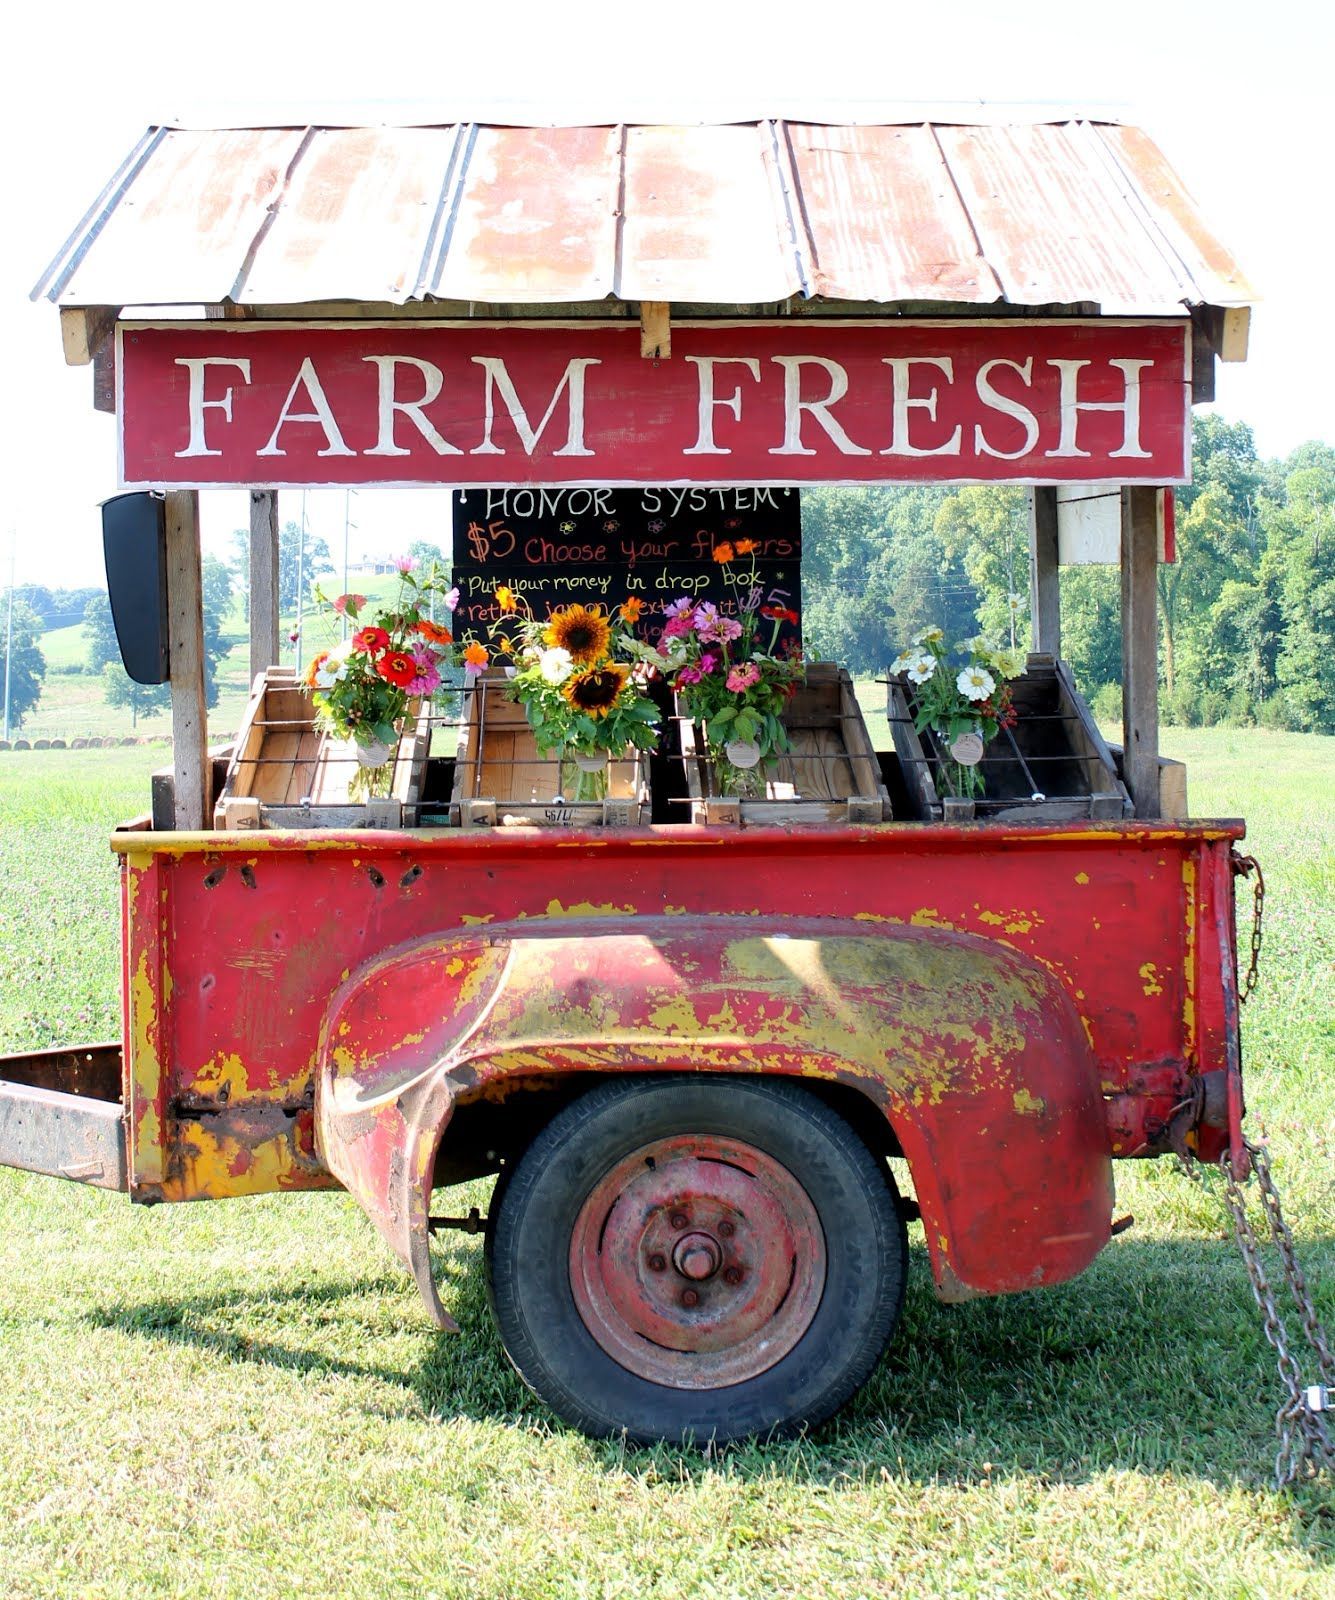 Taking a truck bed trailer and reusing it as a ‘farm stand’… a double repurpose!